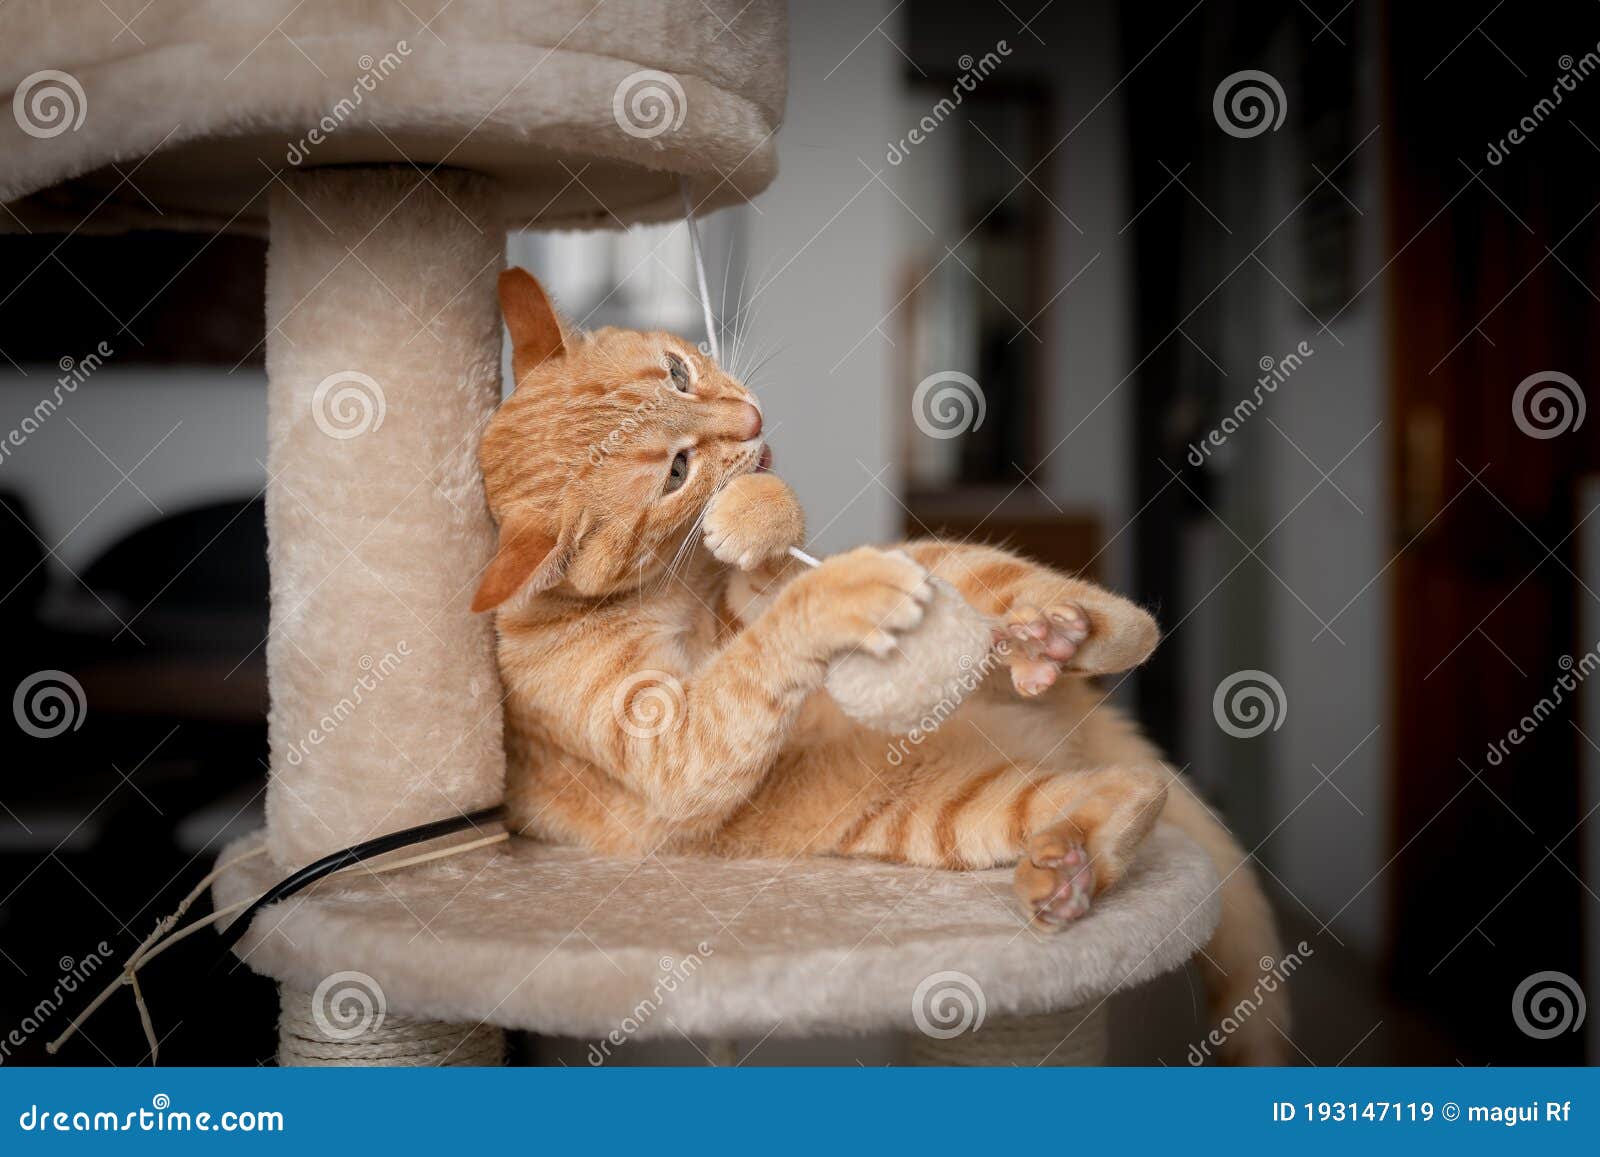 brown tabby cat bites and plays with a fur ball on a scratching tower